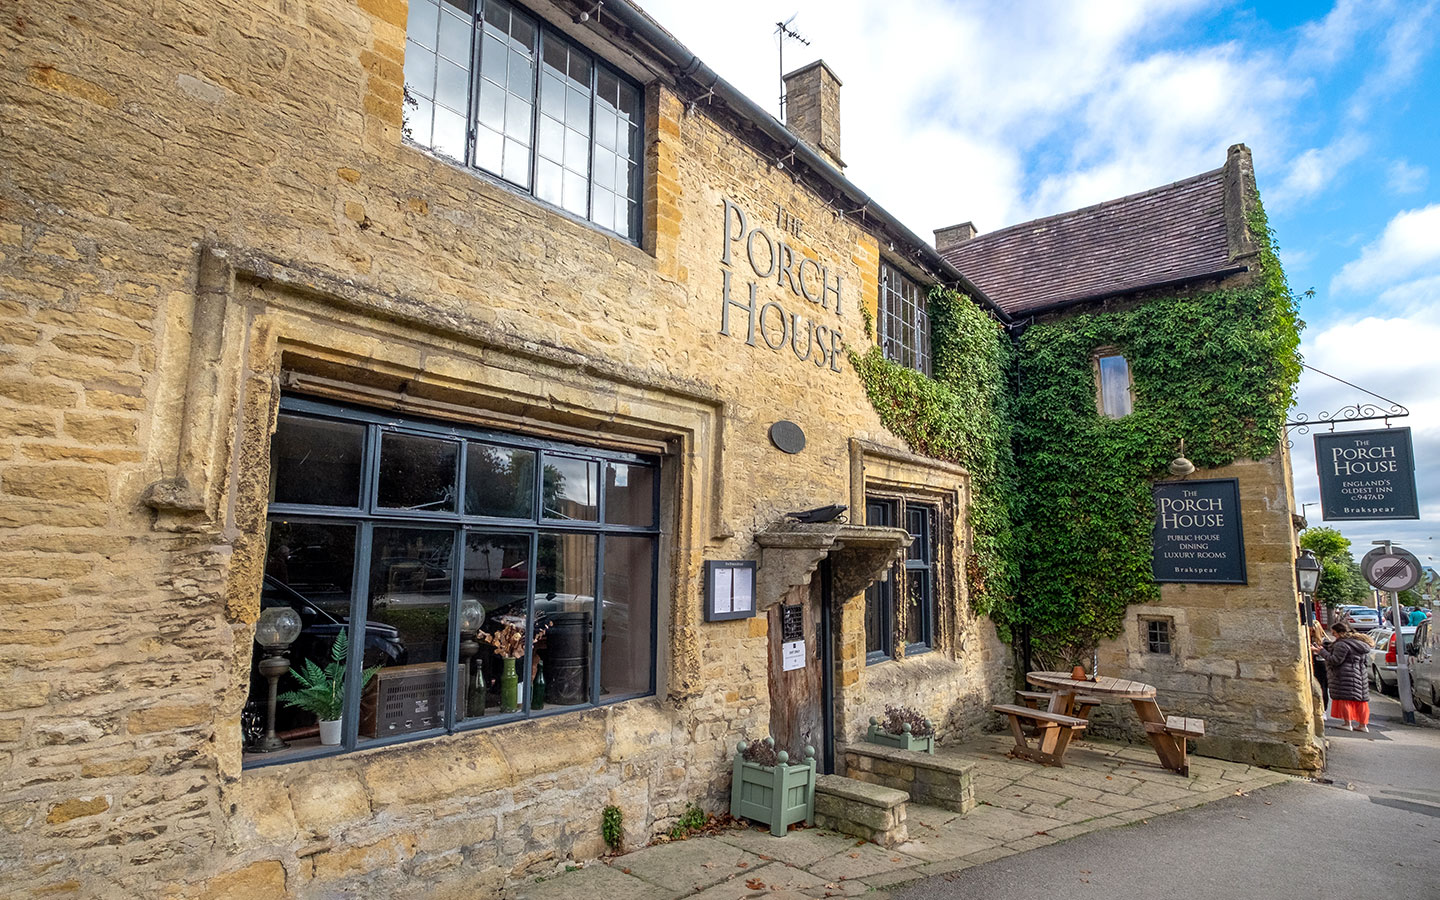 The historic Porch House in Stow-on-the-Wold